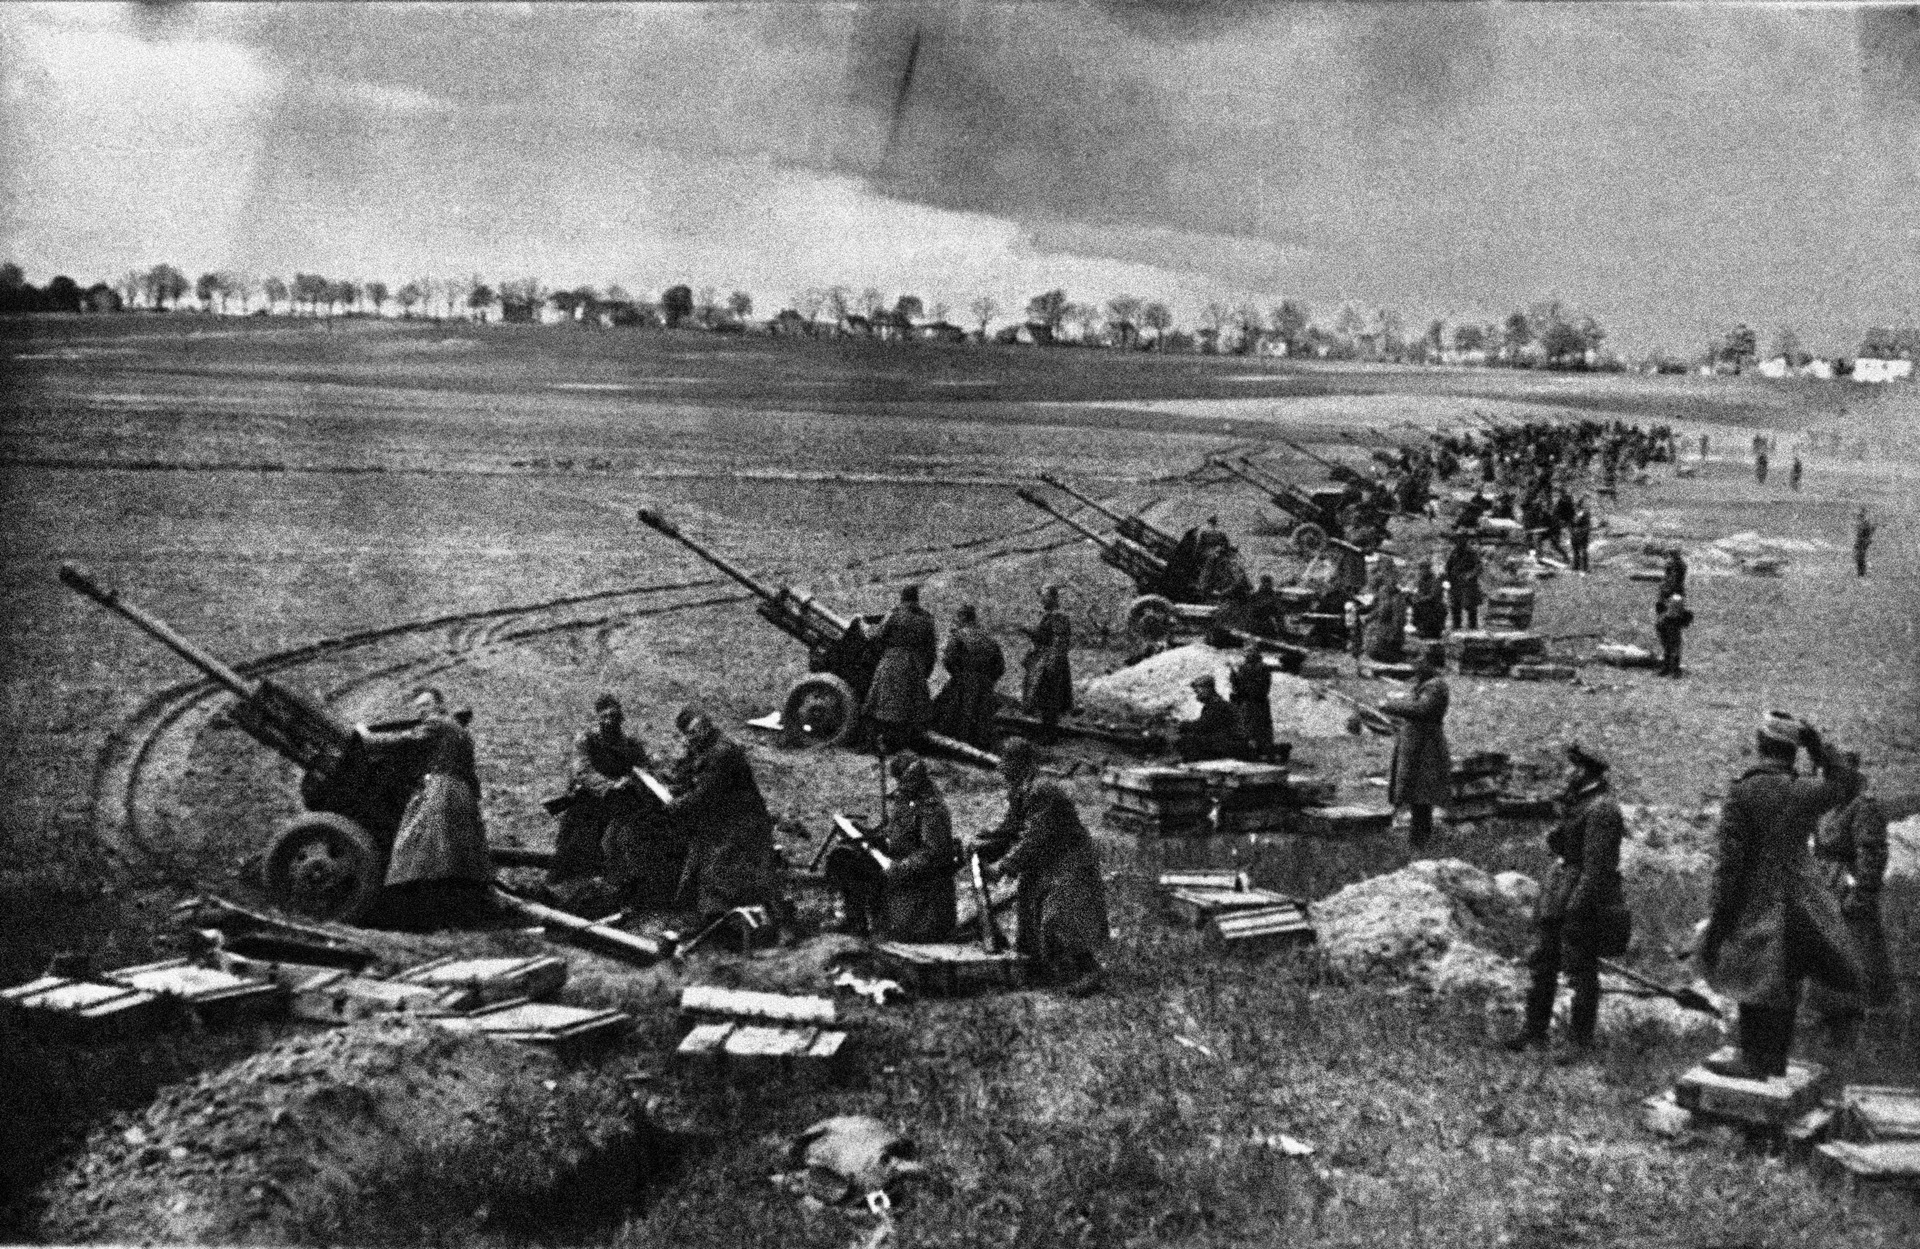 The Red Army packed as many as 270 pieces of artillery on each mile of their battlefront. Many of the rear-echelon German troops thrust into the front line panicked in the face of the ferocious Soviet attack. 